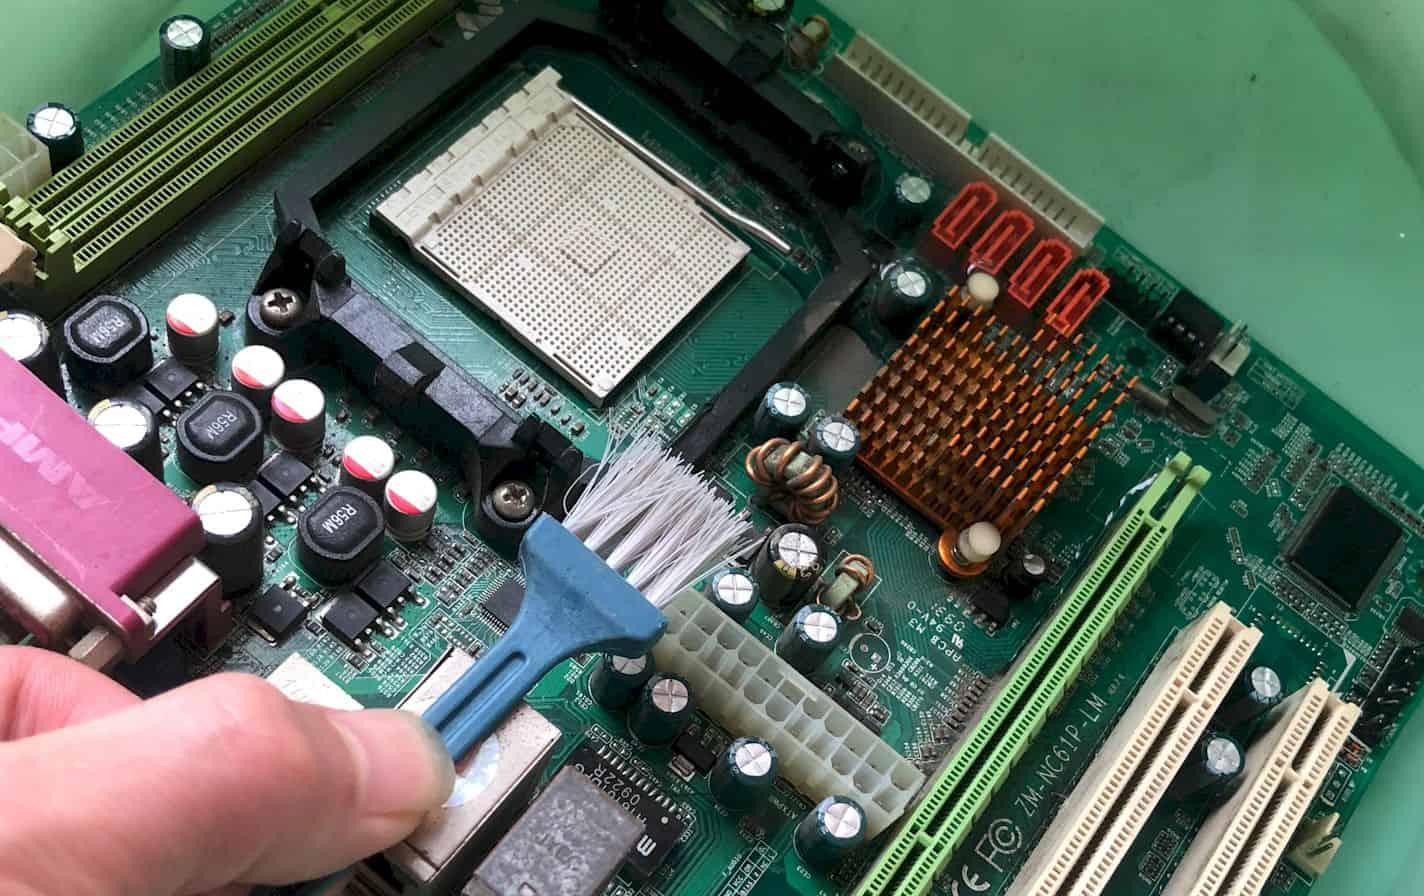 HOW TO TEST A MOTHERBOARD BEFORE INSTALLING